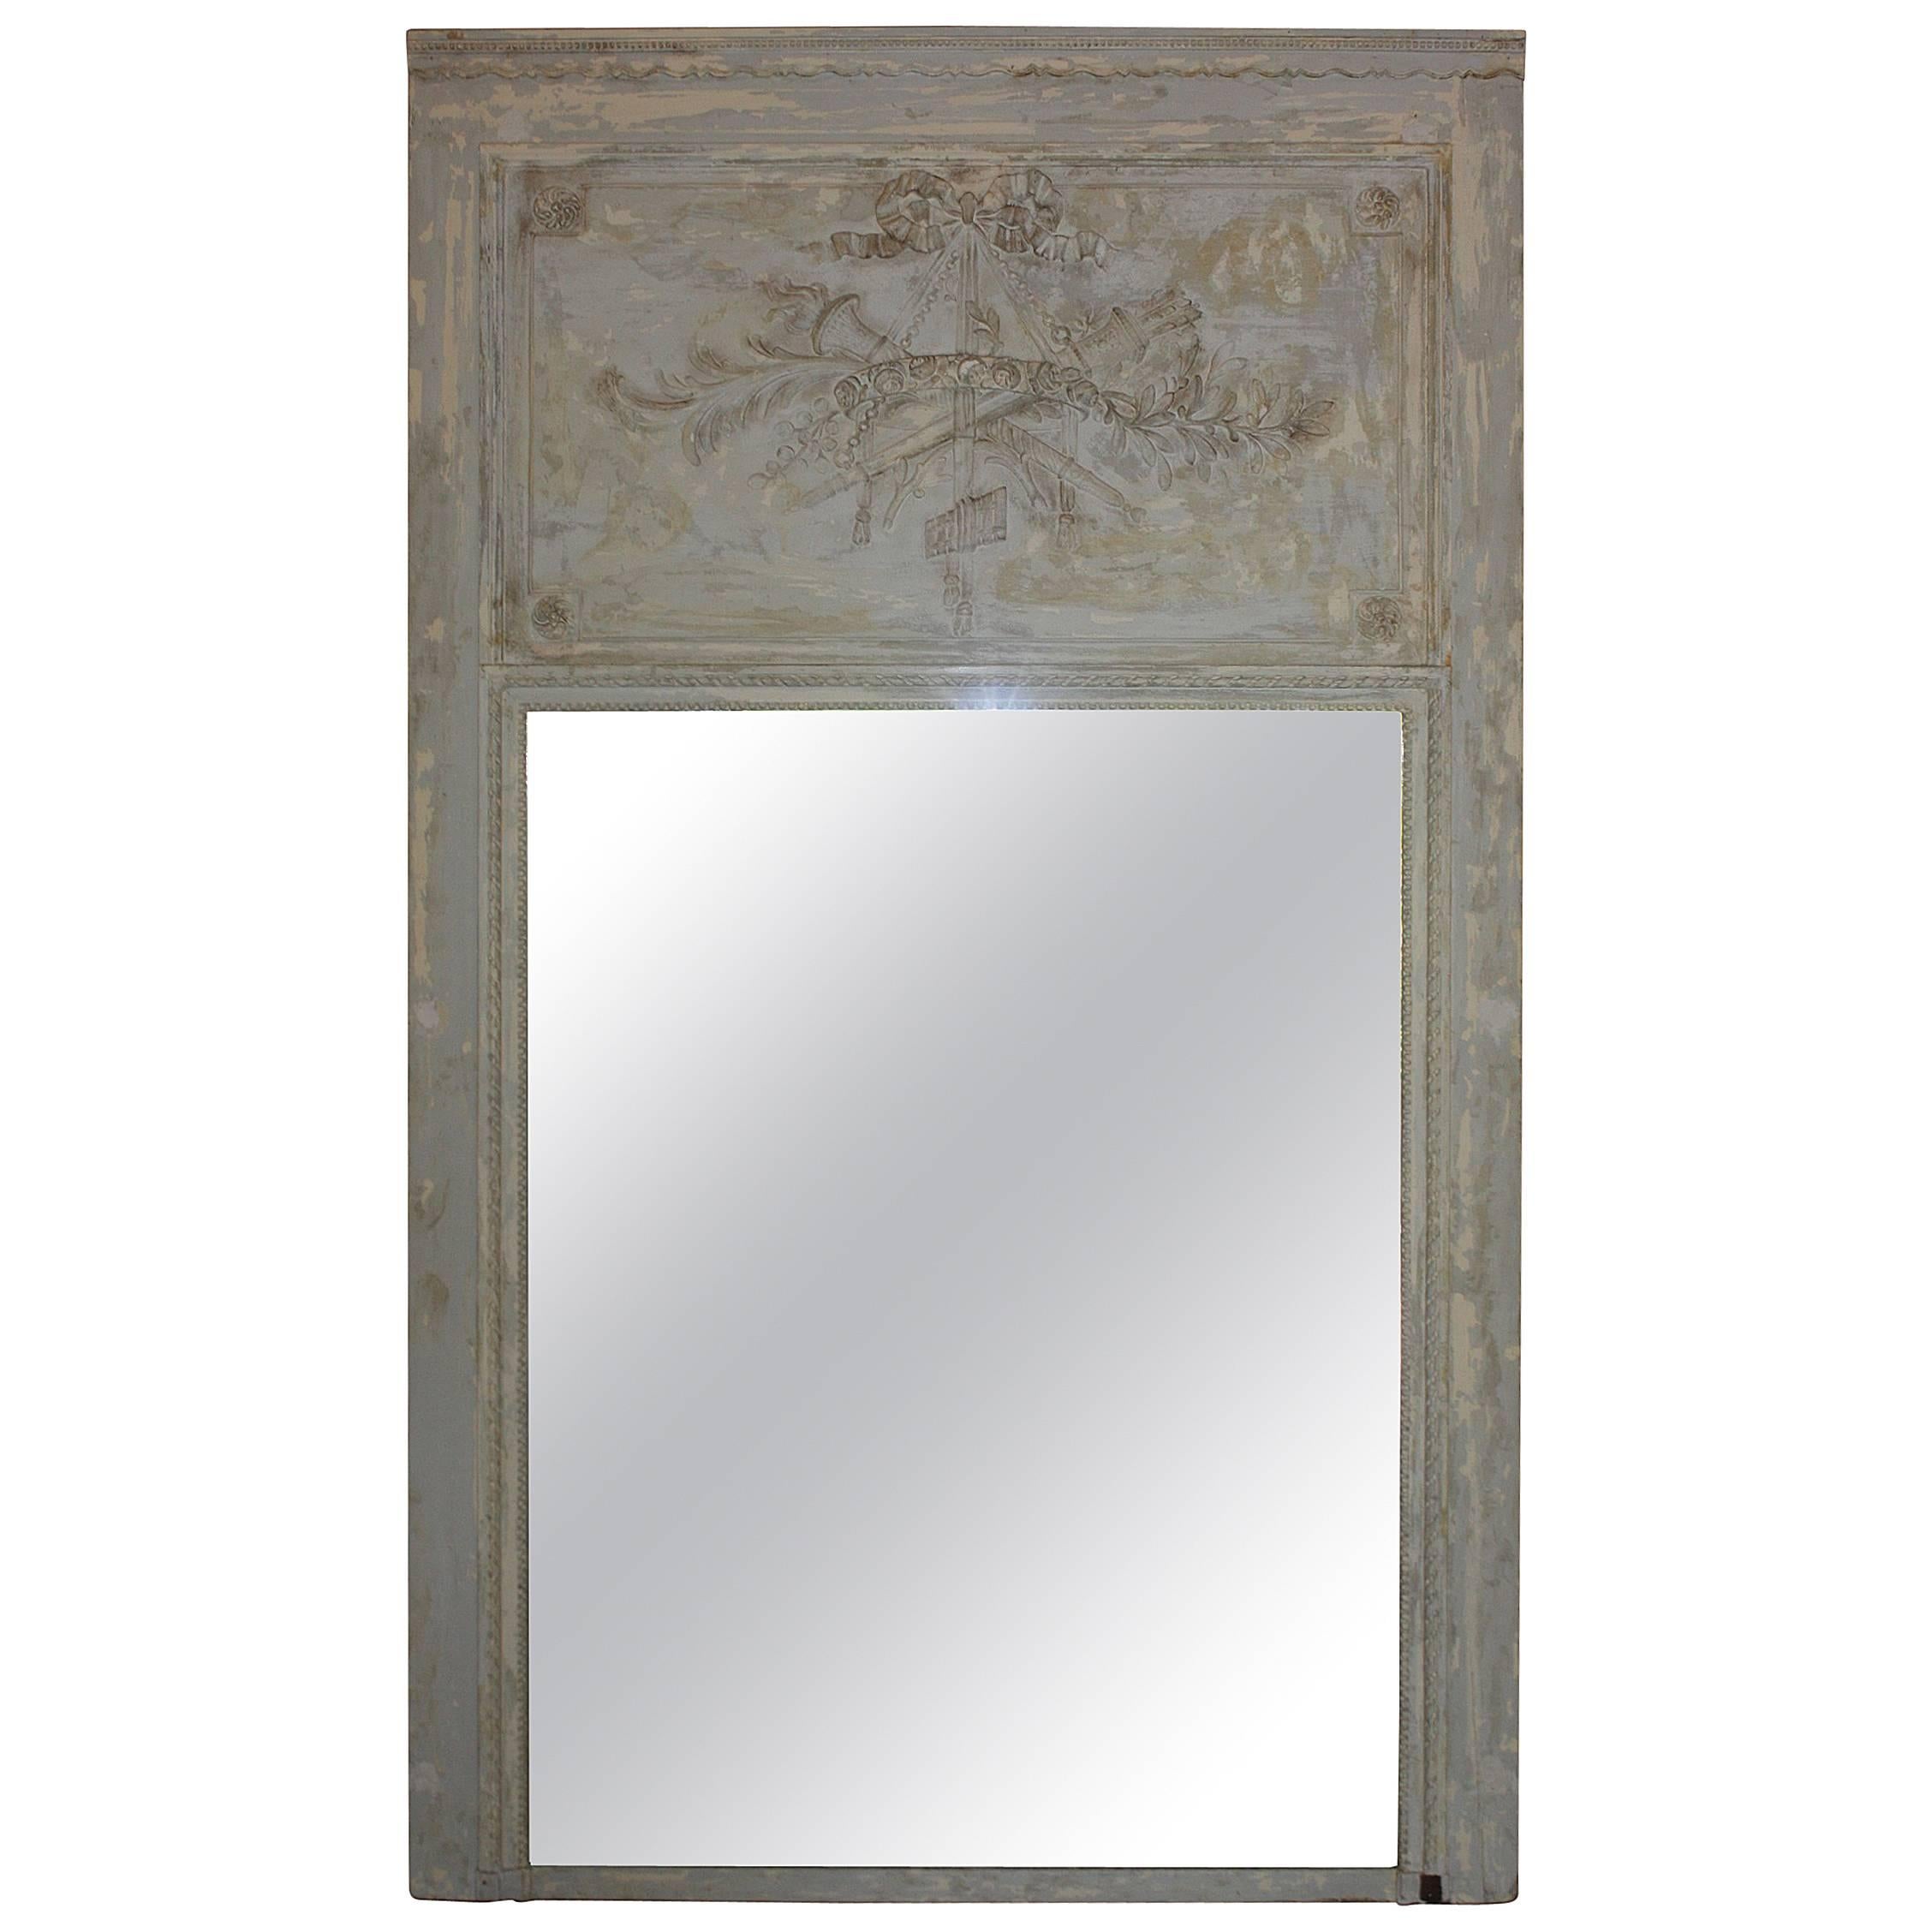 Painted French Trumeau Mirror